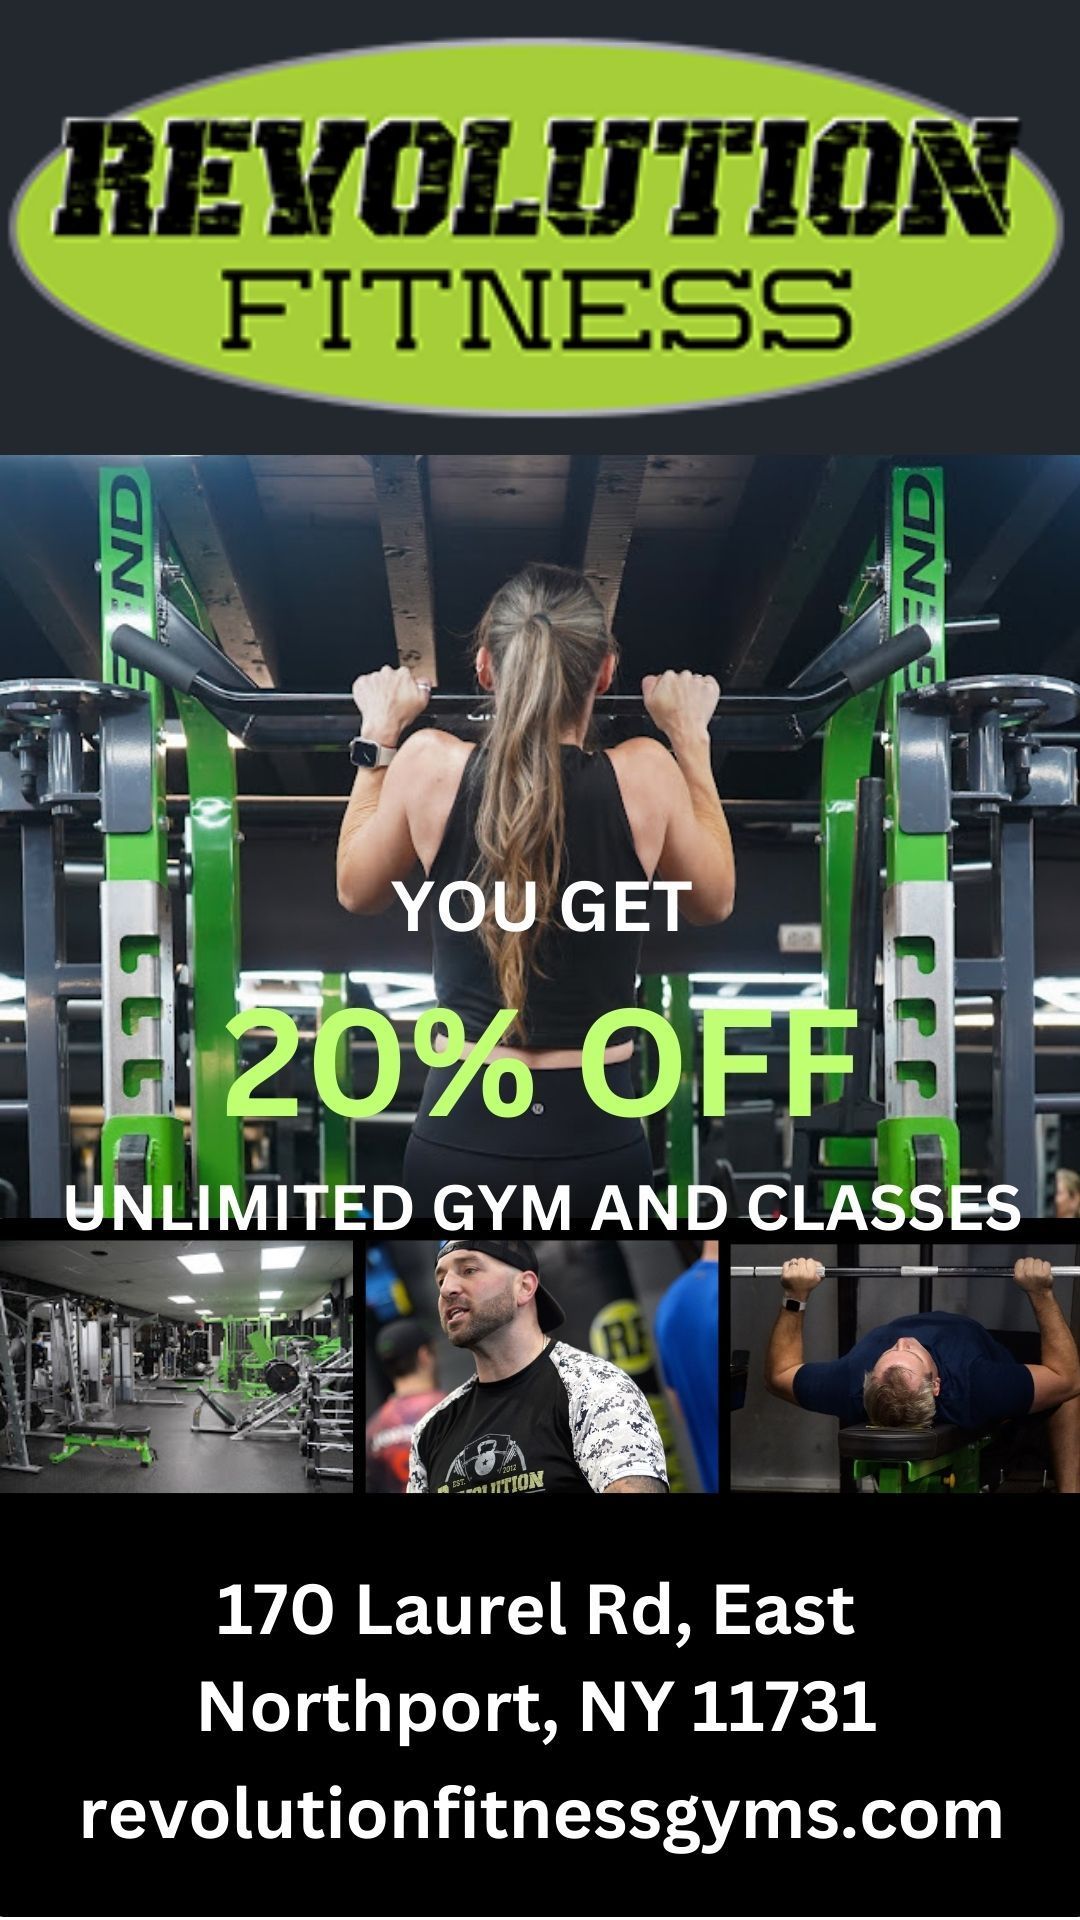 An advertisement for revolution fitness shows a woman doing pull ups